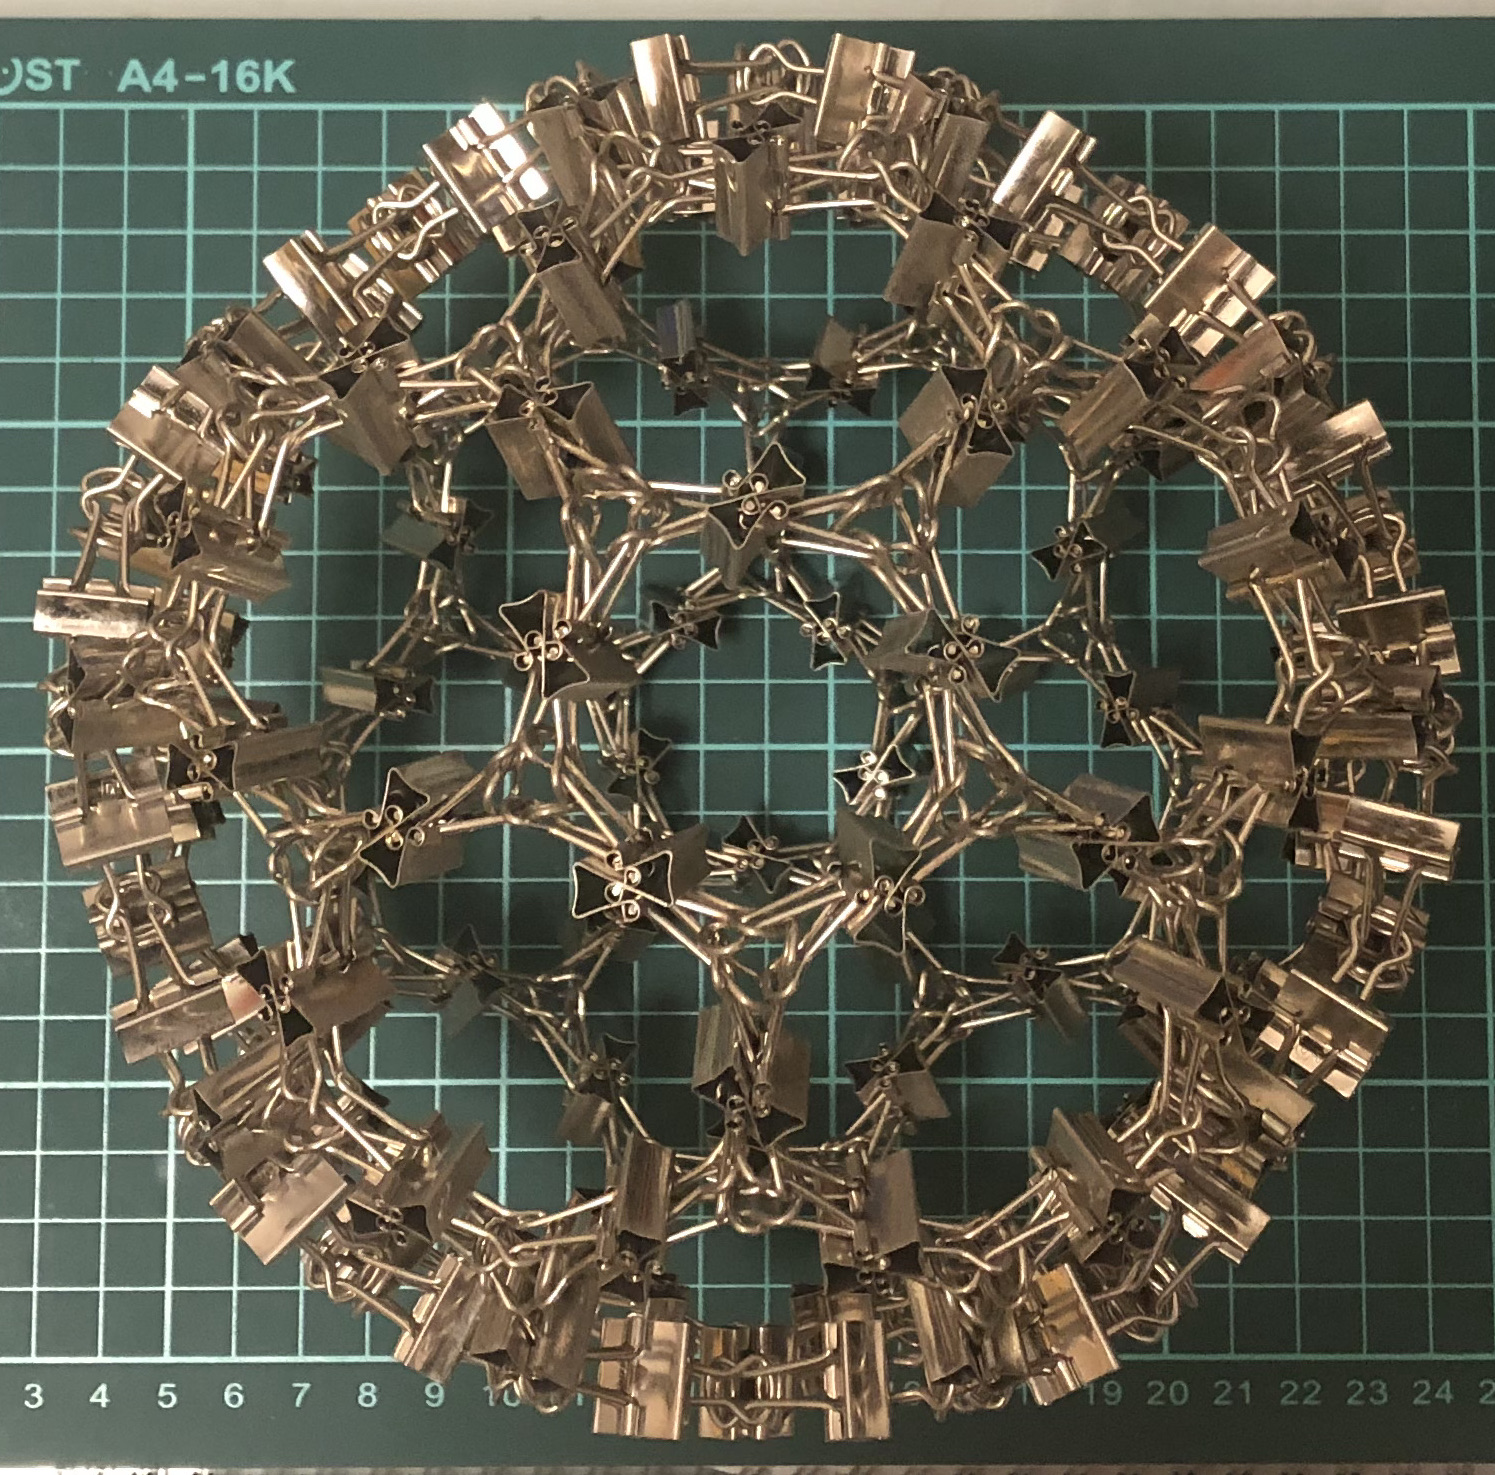 240 clips forming 120 I-edges forming chamfered dodecahedron